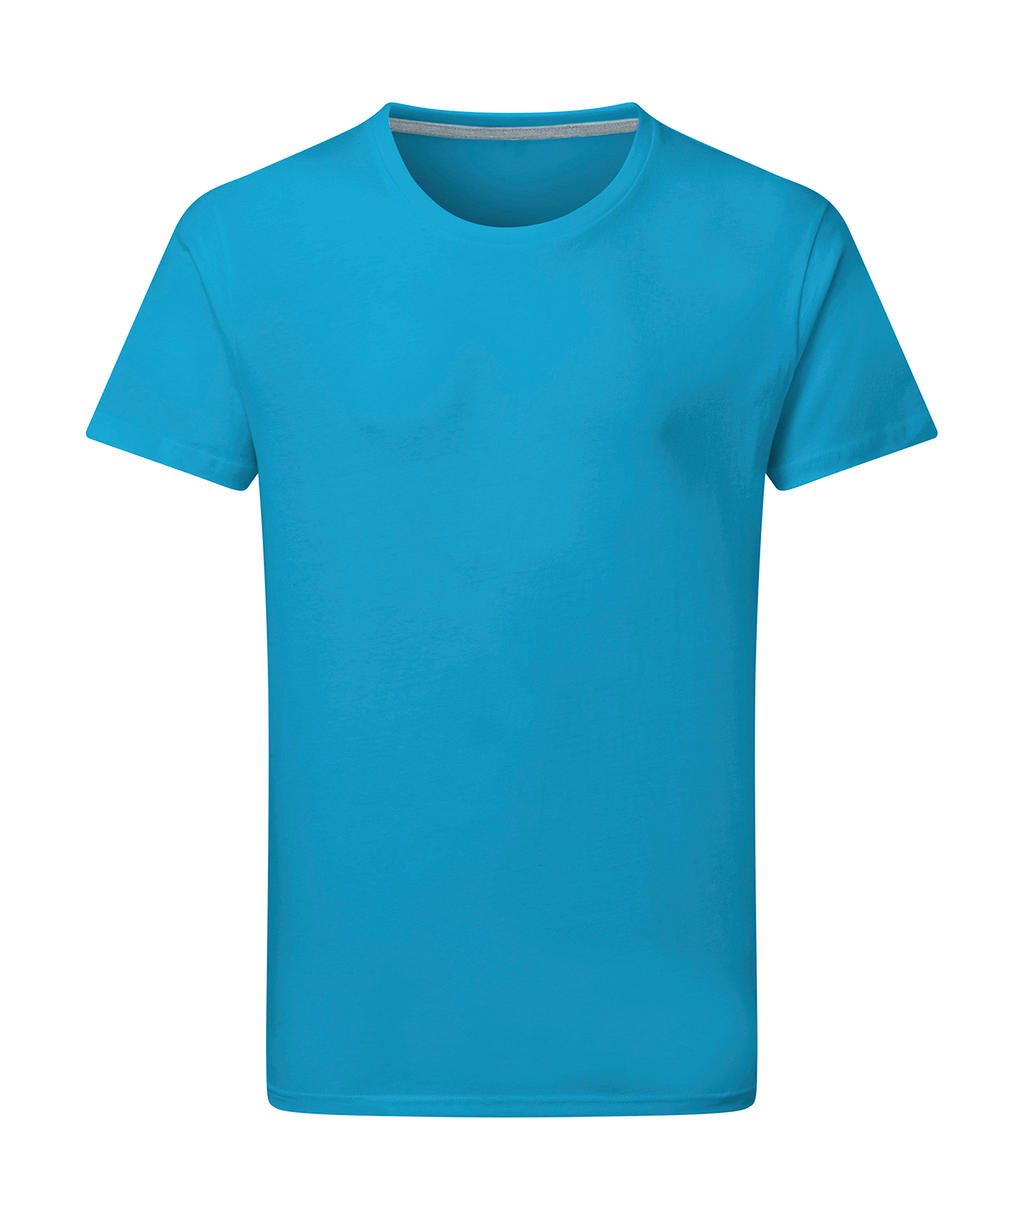  Perfect Print Tagless Tee in Farbe Turquoise